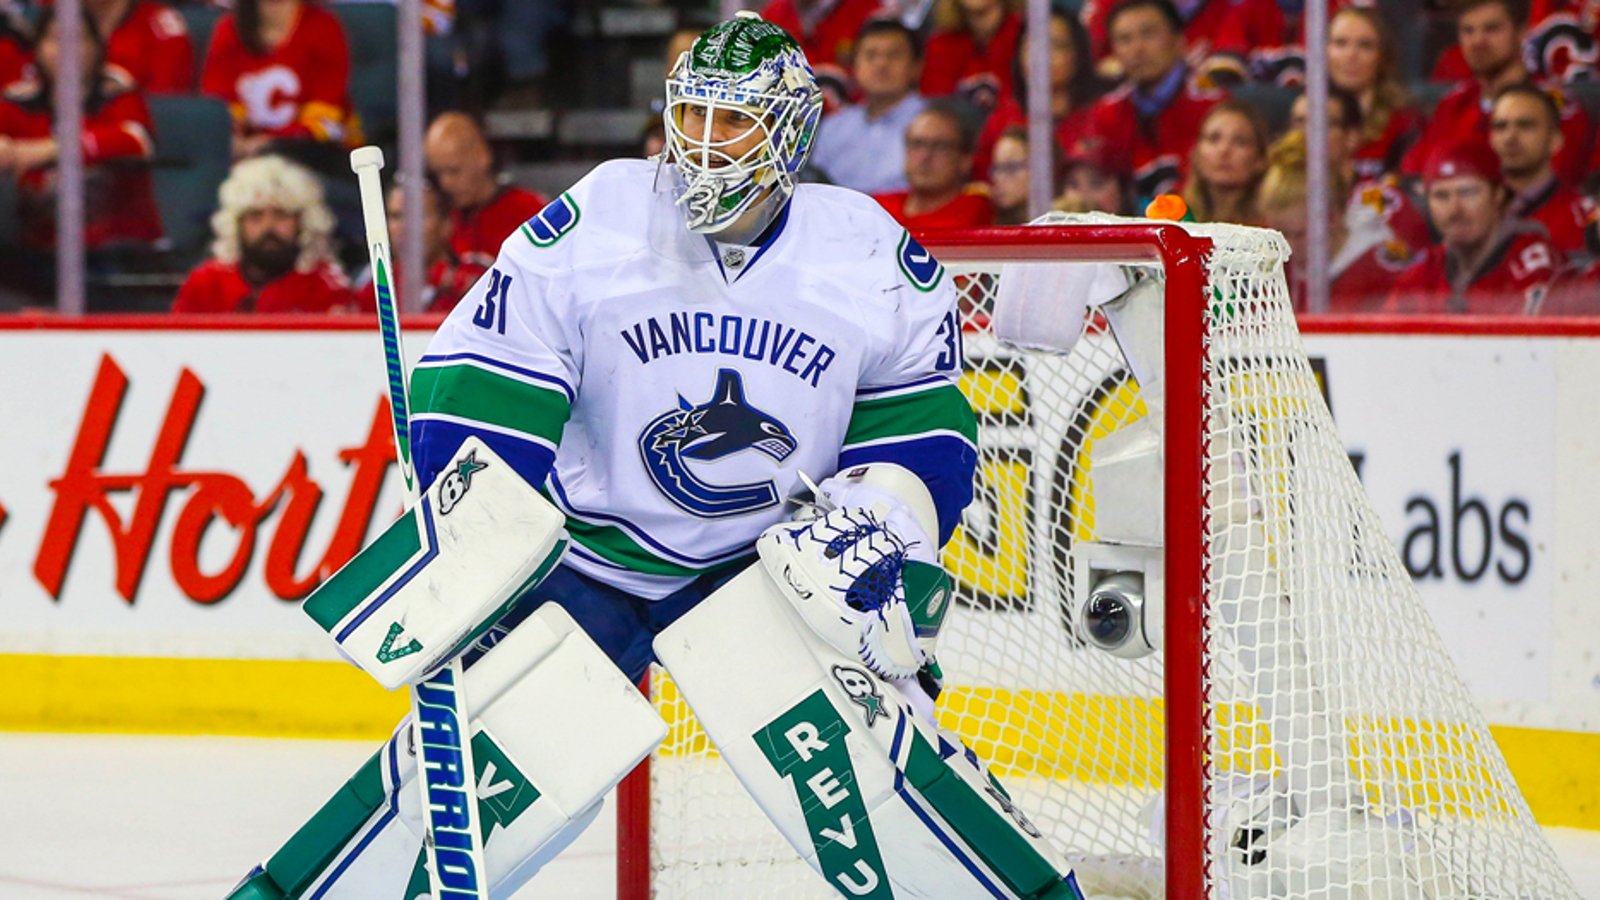 Eddie Lack officially retires from professional hockey